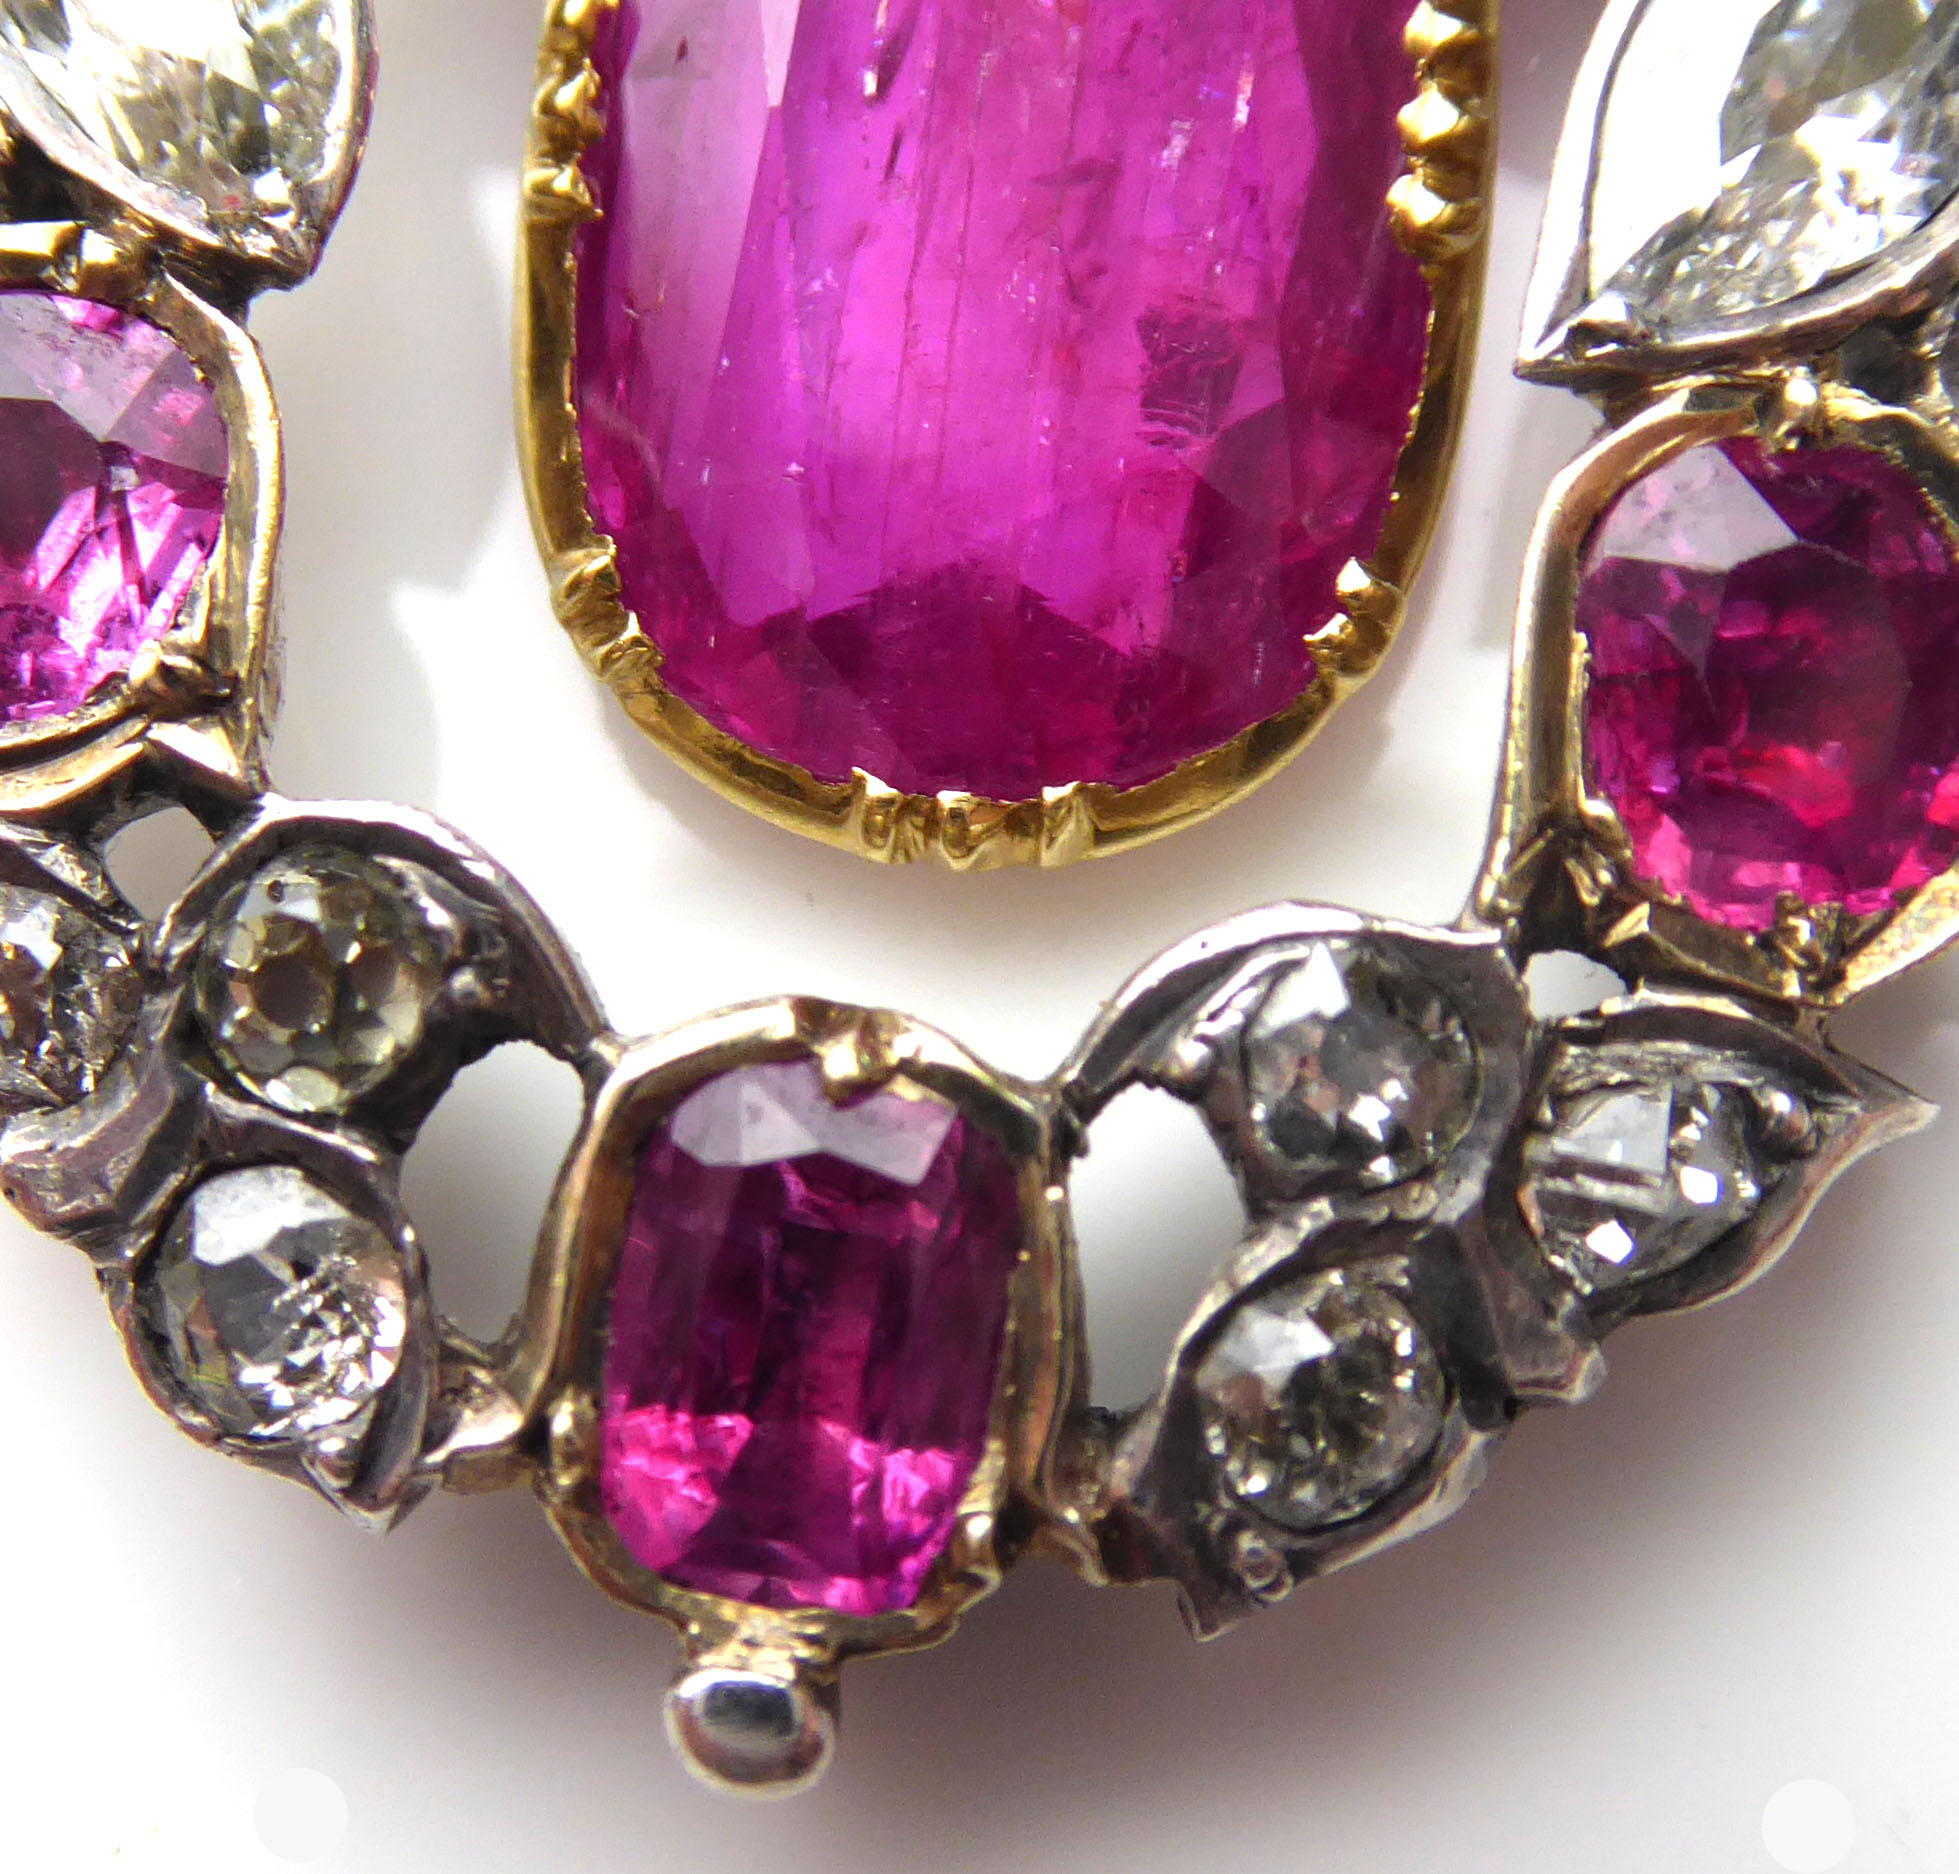 AN IMPRESSIVE 19TH CENTURY BURMESE RUBY, SAPPHIRE AND DIAMOND PENDANT, CIRCA 1820 The articulated - Image 6 of 10